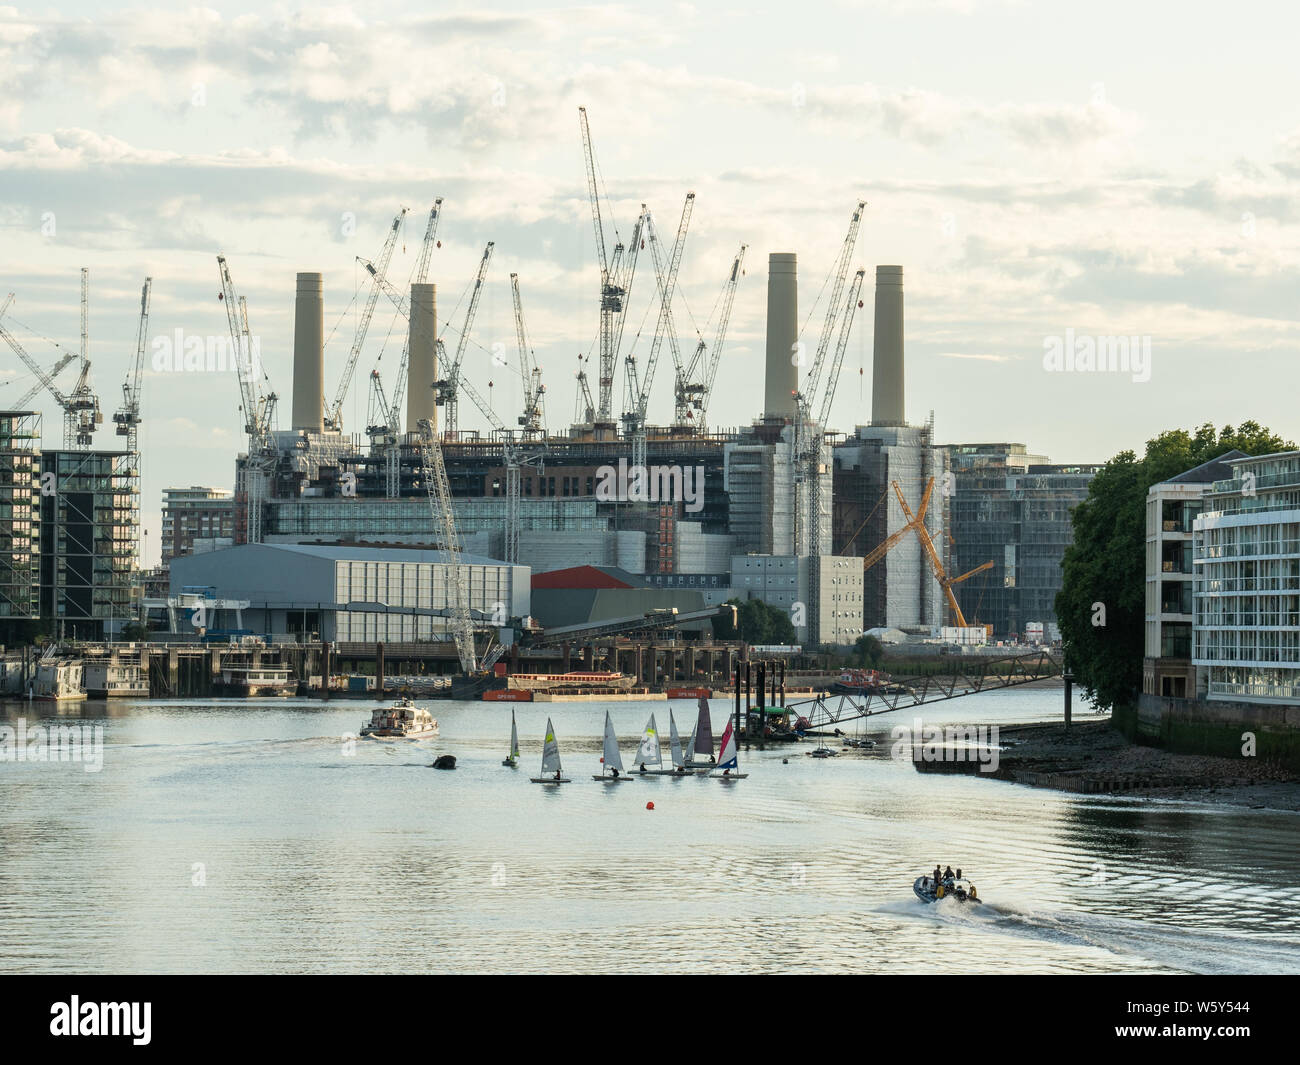 Sailing boats on the River Thames with the decommissioned Battersea Power Station on the south bank behind, Battersea, London. Stock Photo